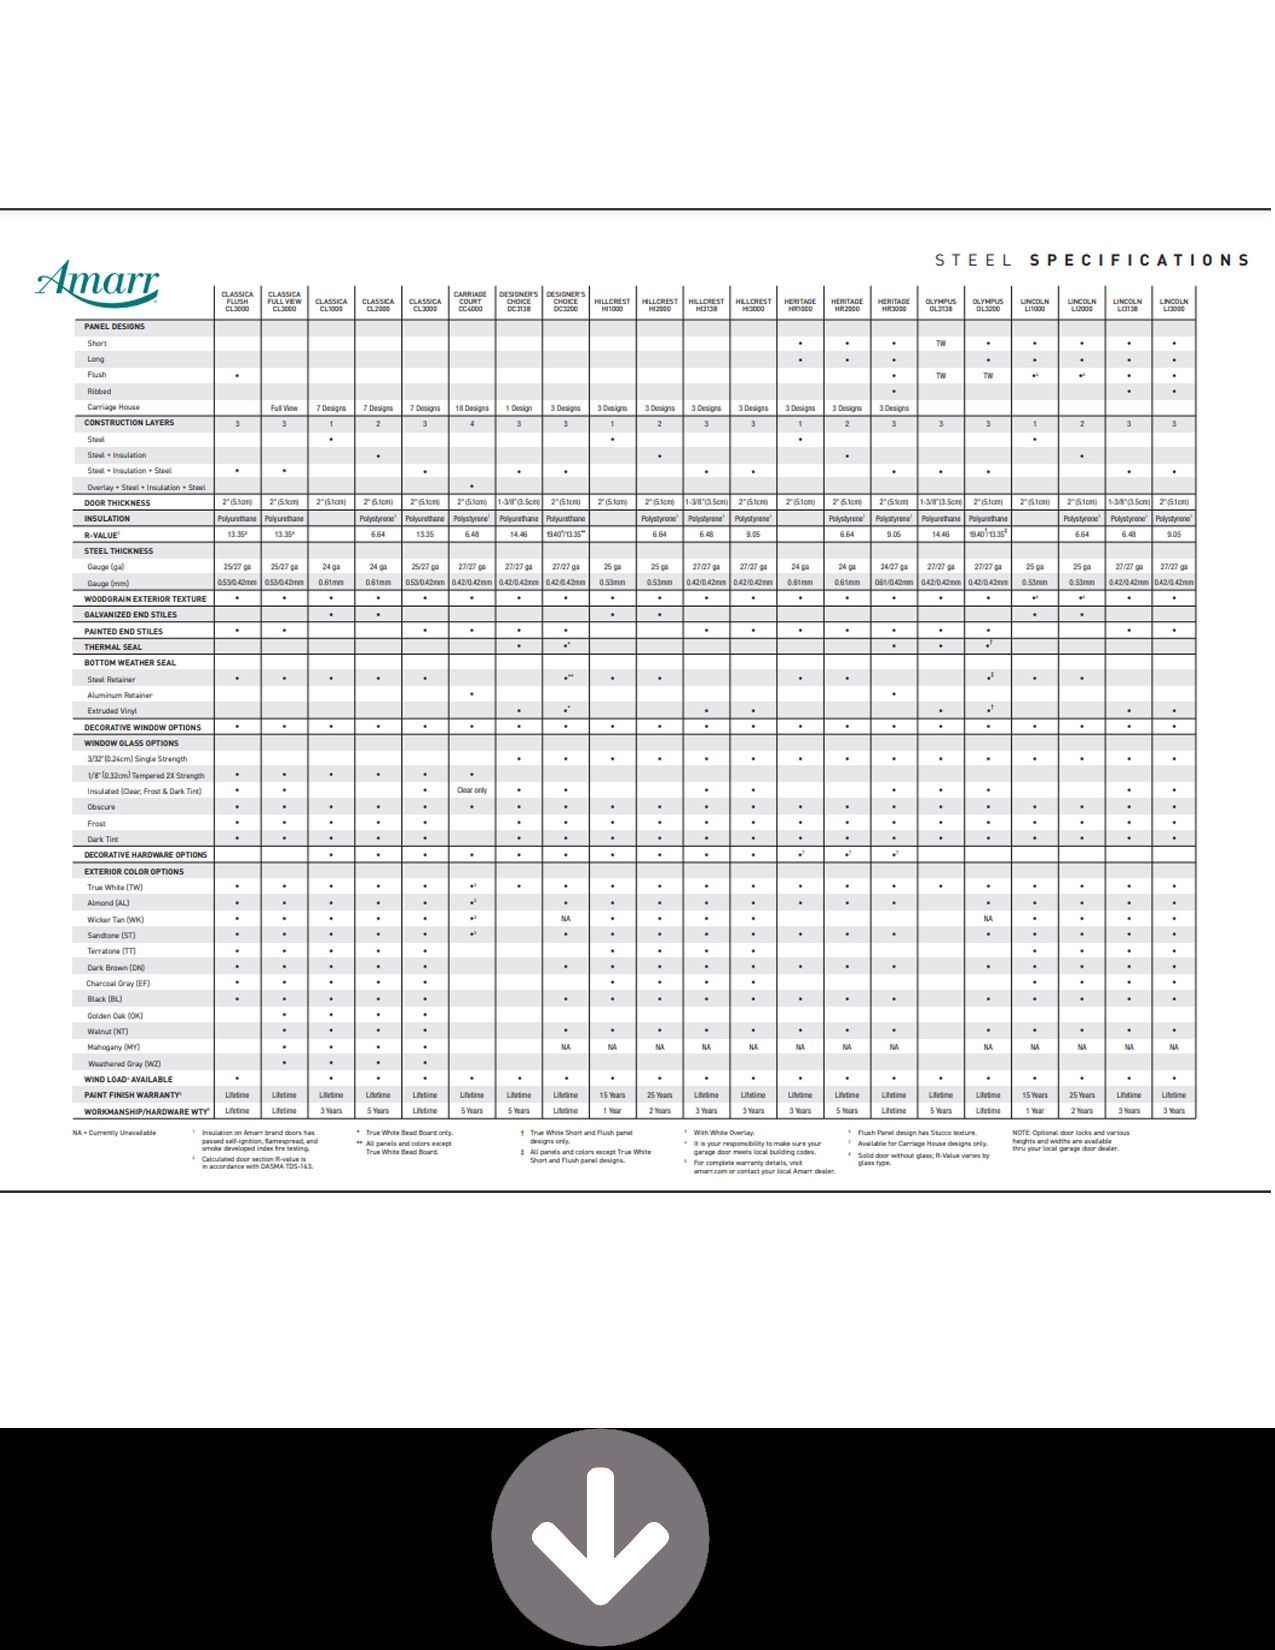 Amarr Residential Specification Chart 